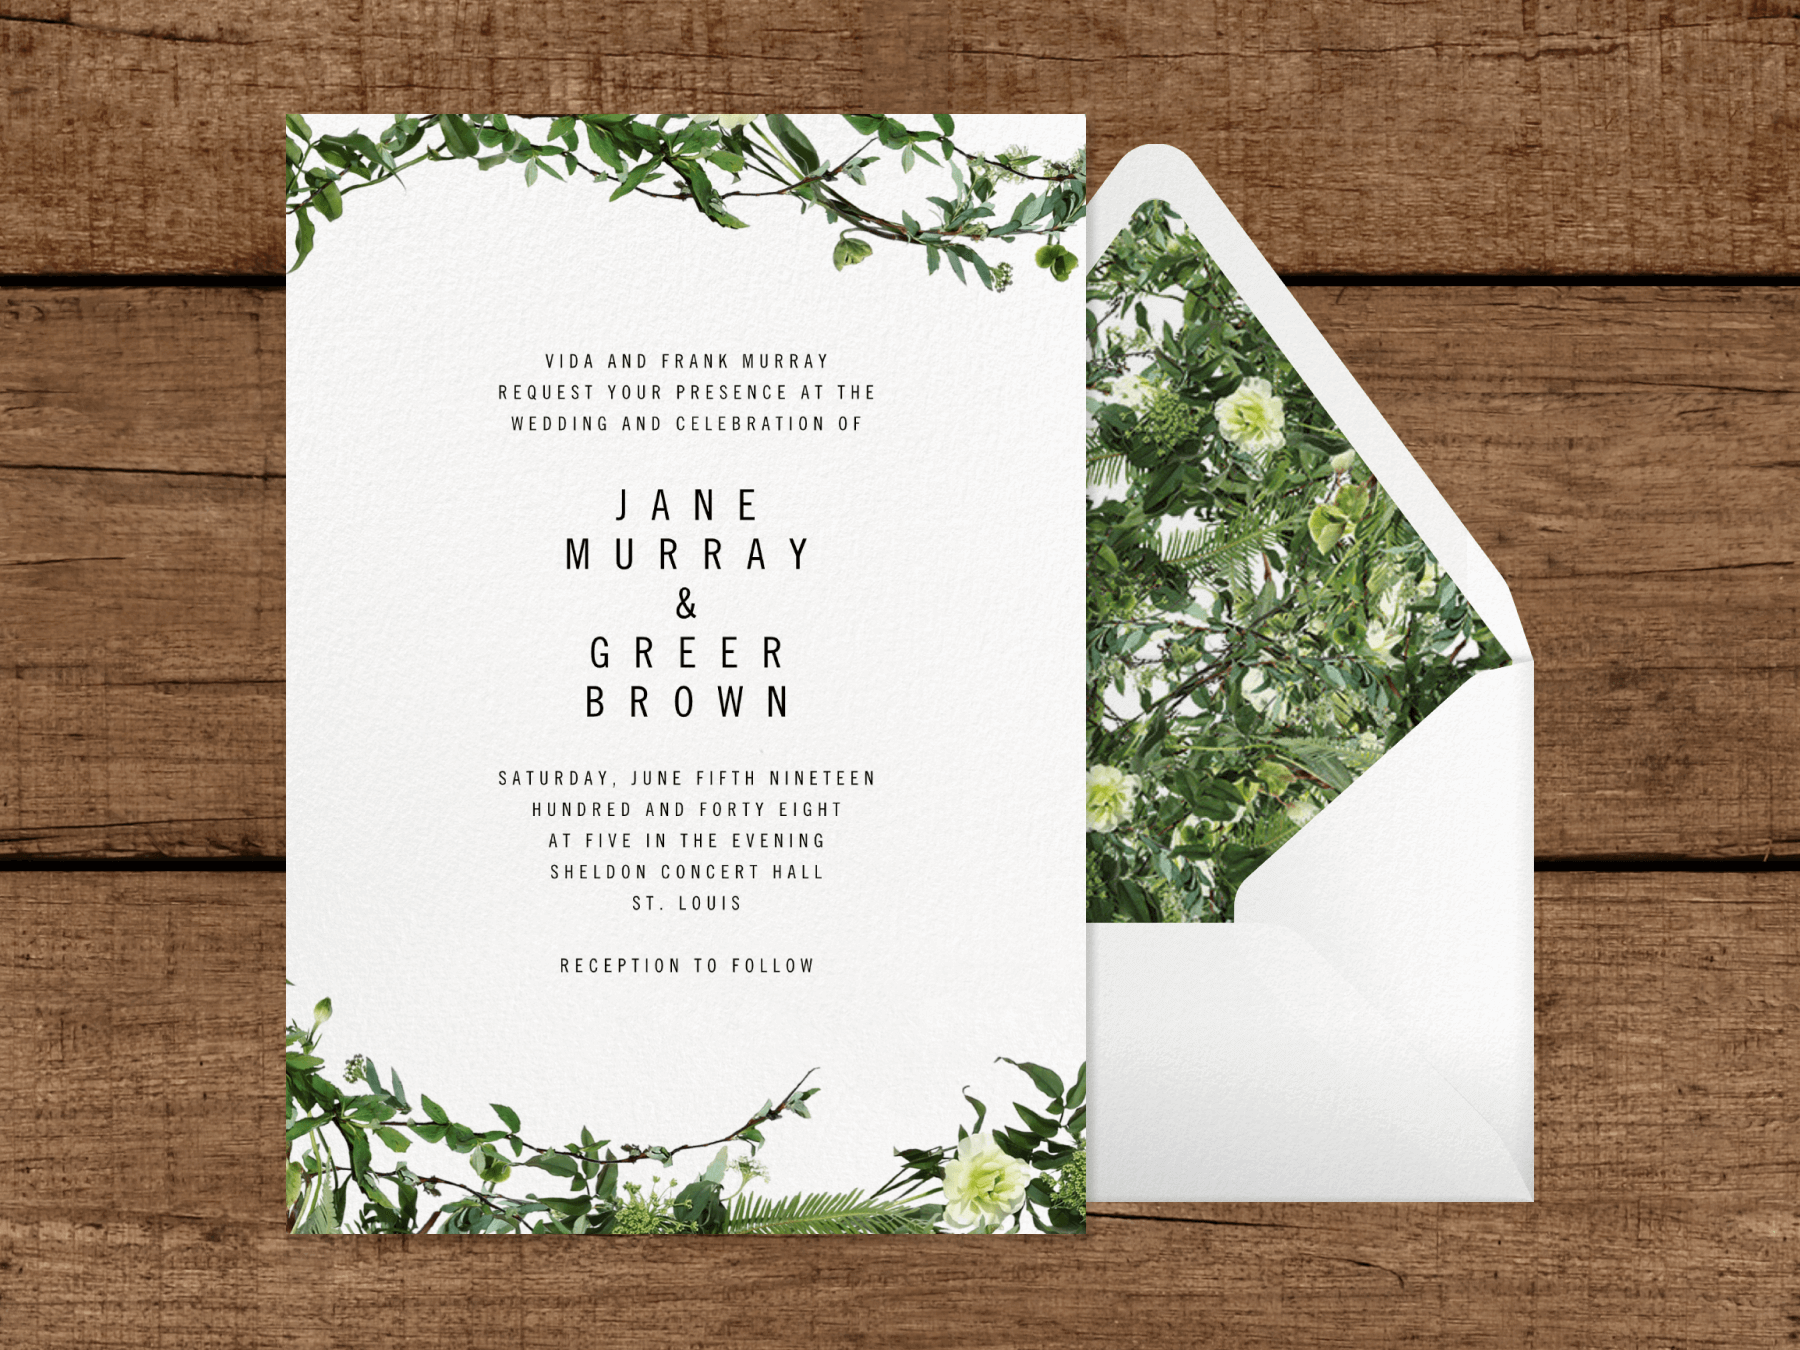 A white wedding invitation with delicate greenery on the top and bottom next to a white envelope with leafy liner, on a wood slat background.